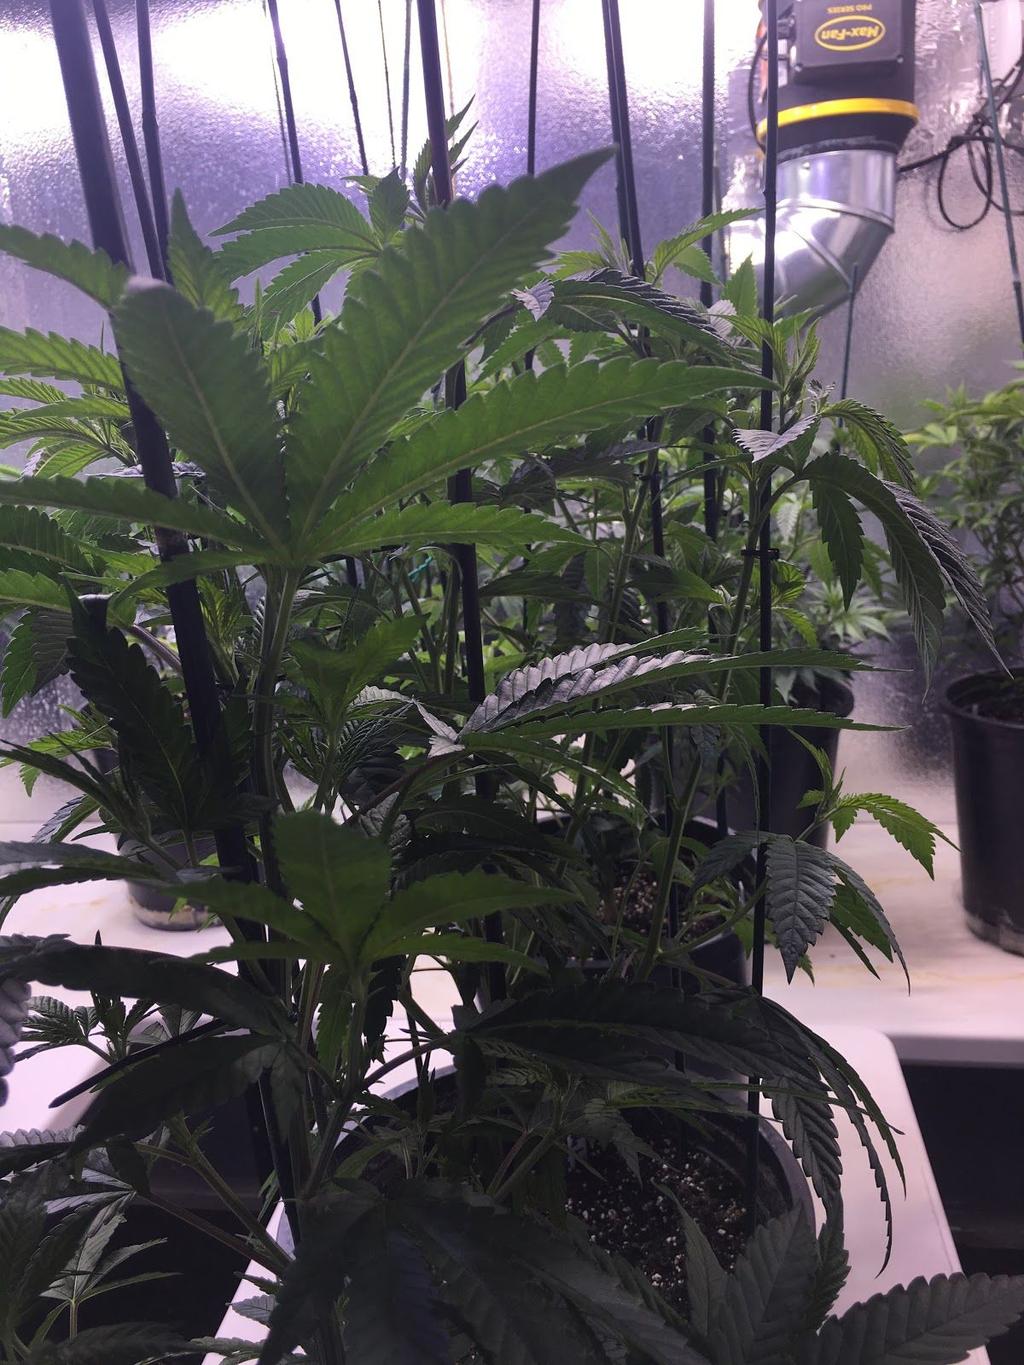 the grow cycle. Once the new specimens were transplanted, they were put under Metal Halide lighting for the vegetative process.